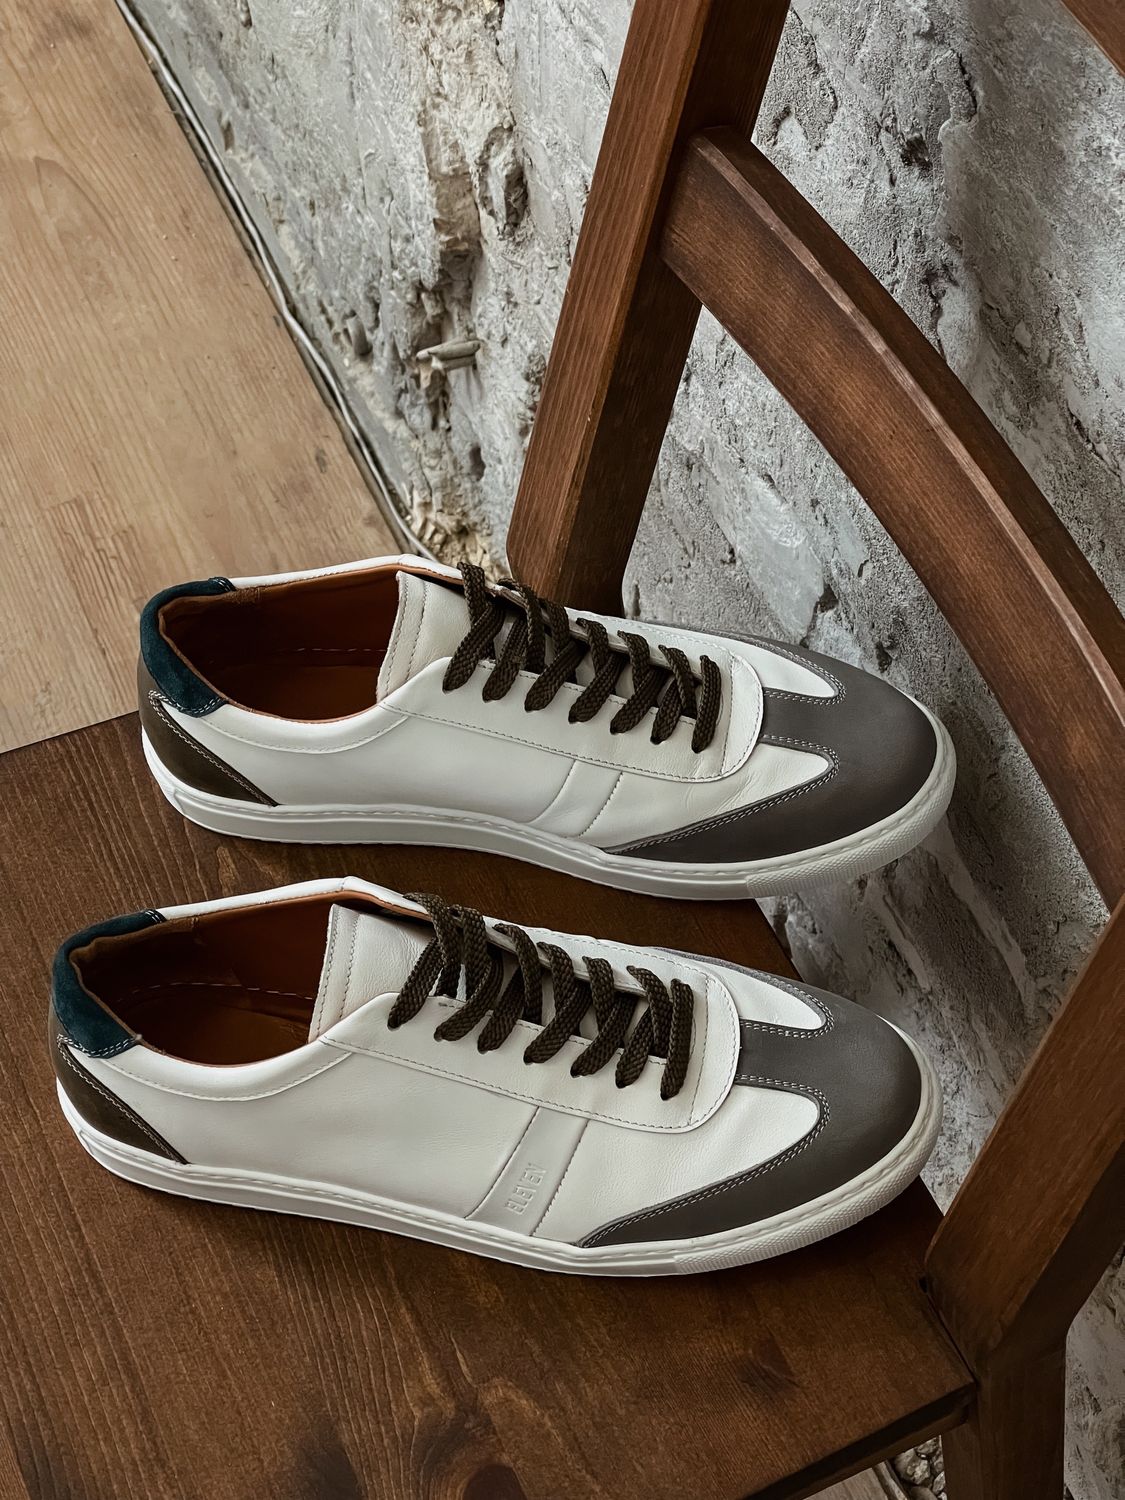 Formal Sneakers - 11shoes - sneakers for all occasions.